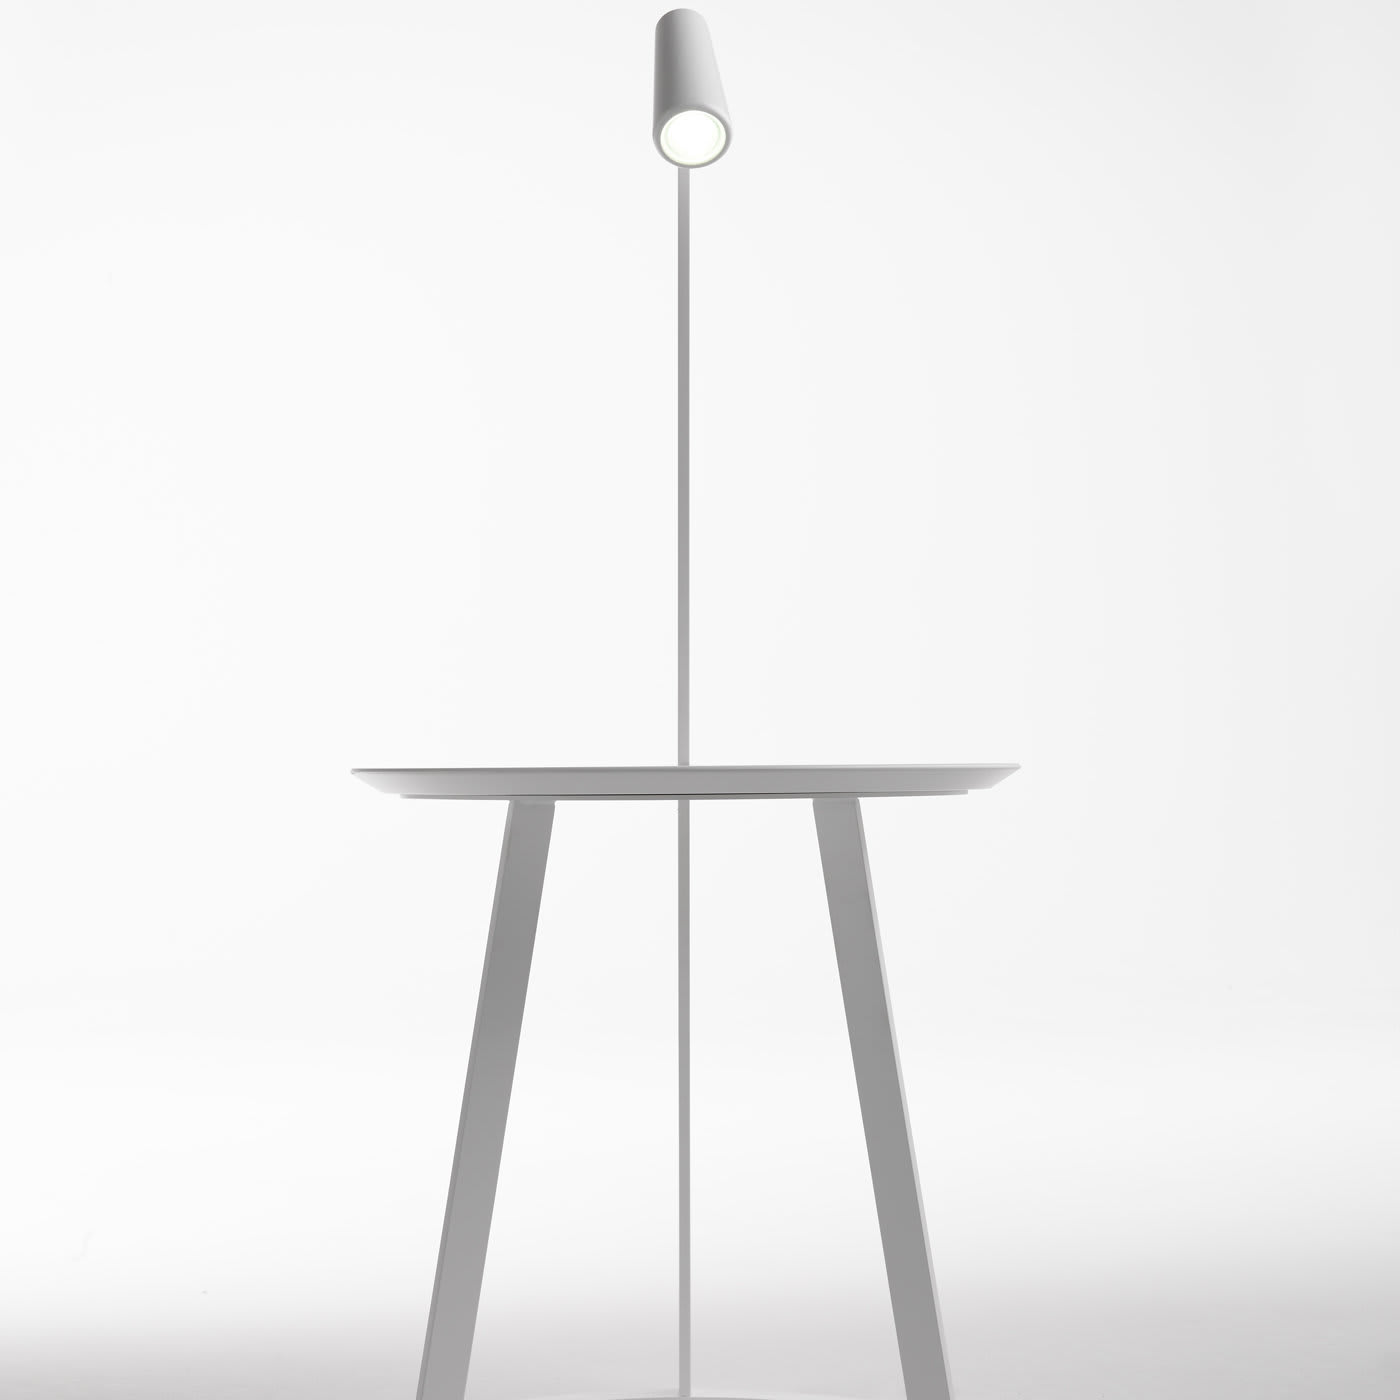 Albino Torcia White Side Table by Salvatore Indriolo - Horm